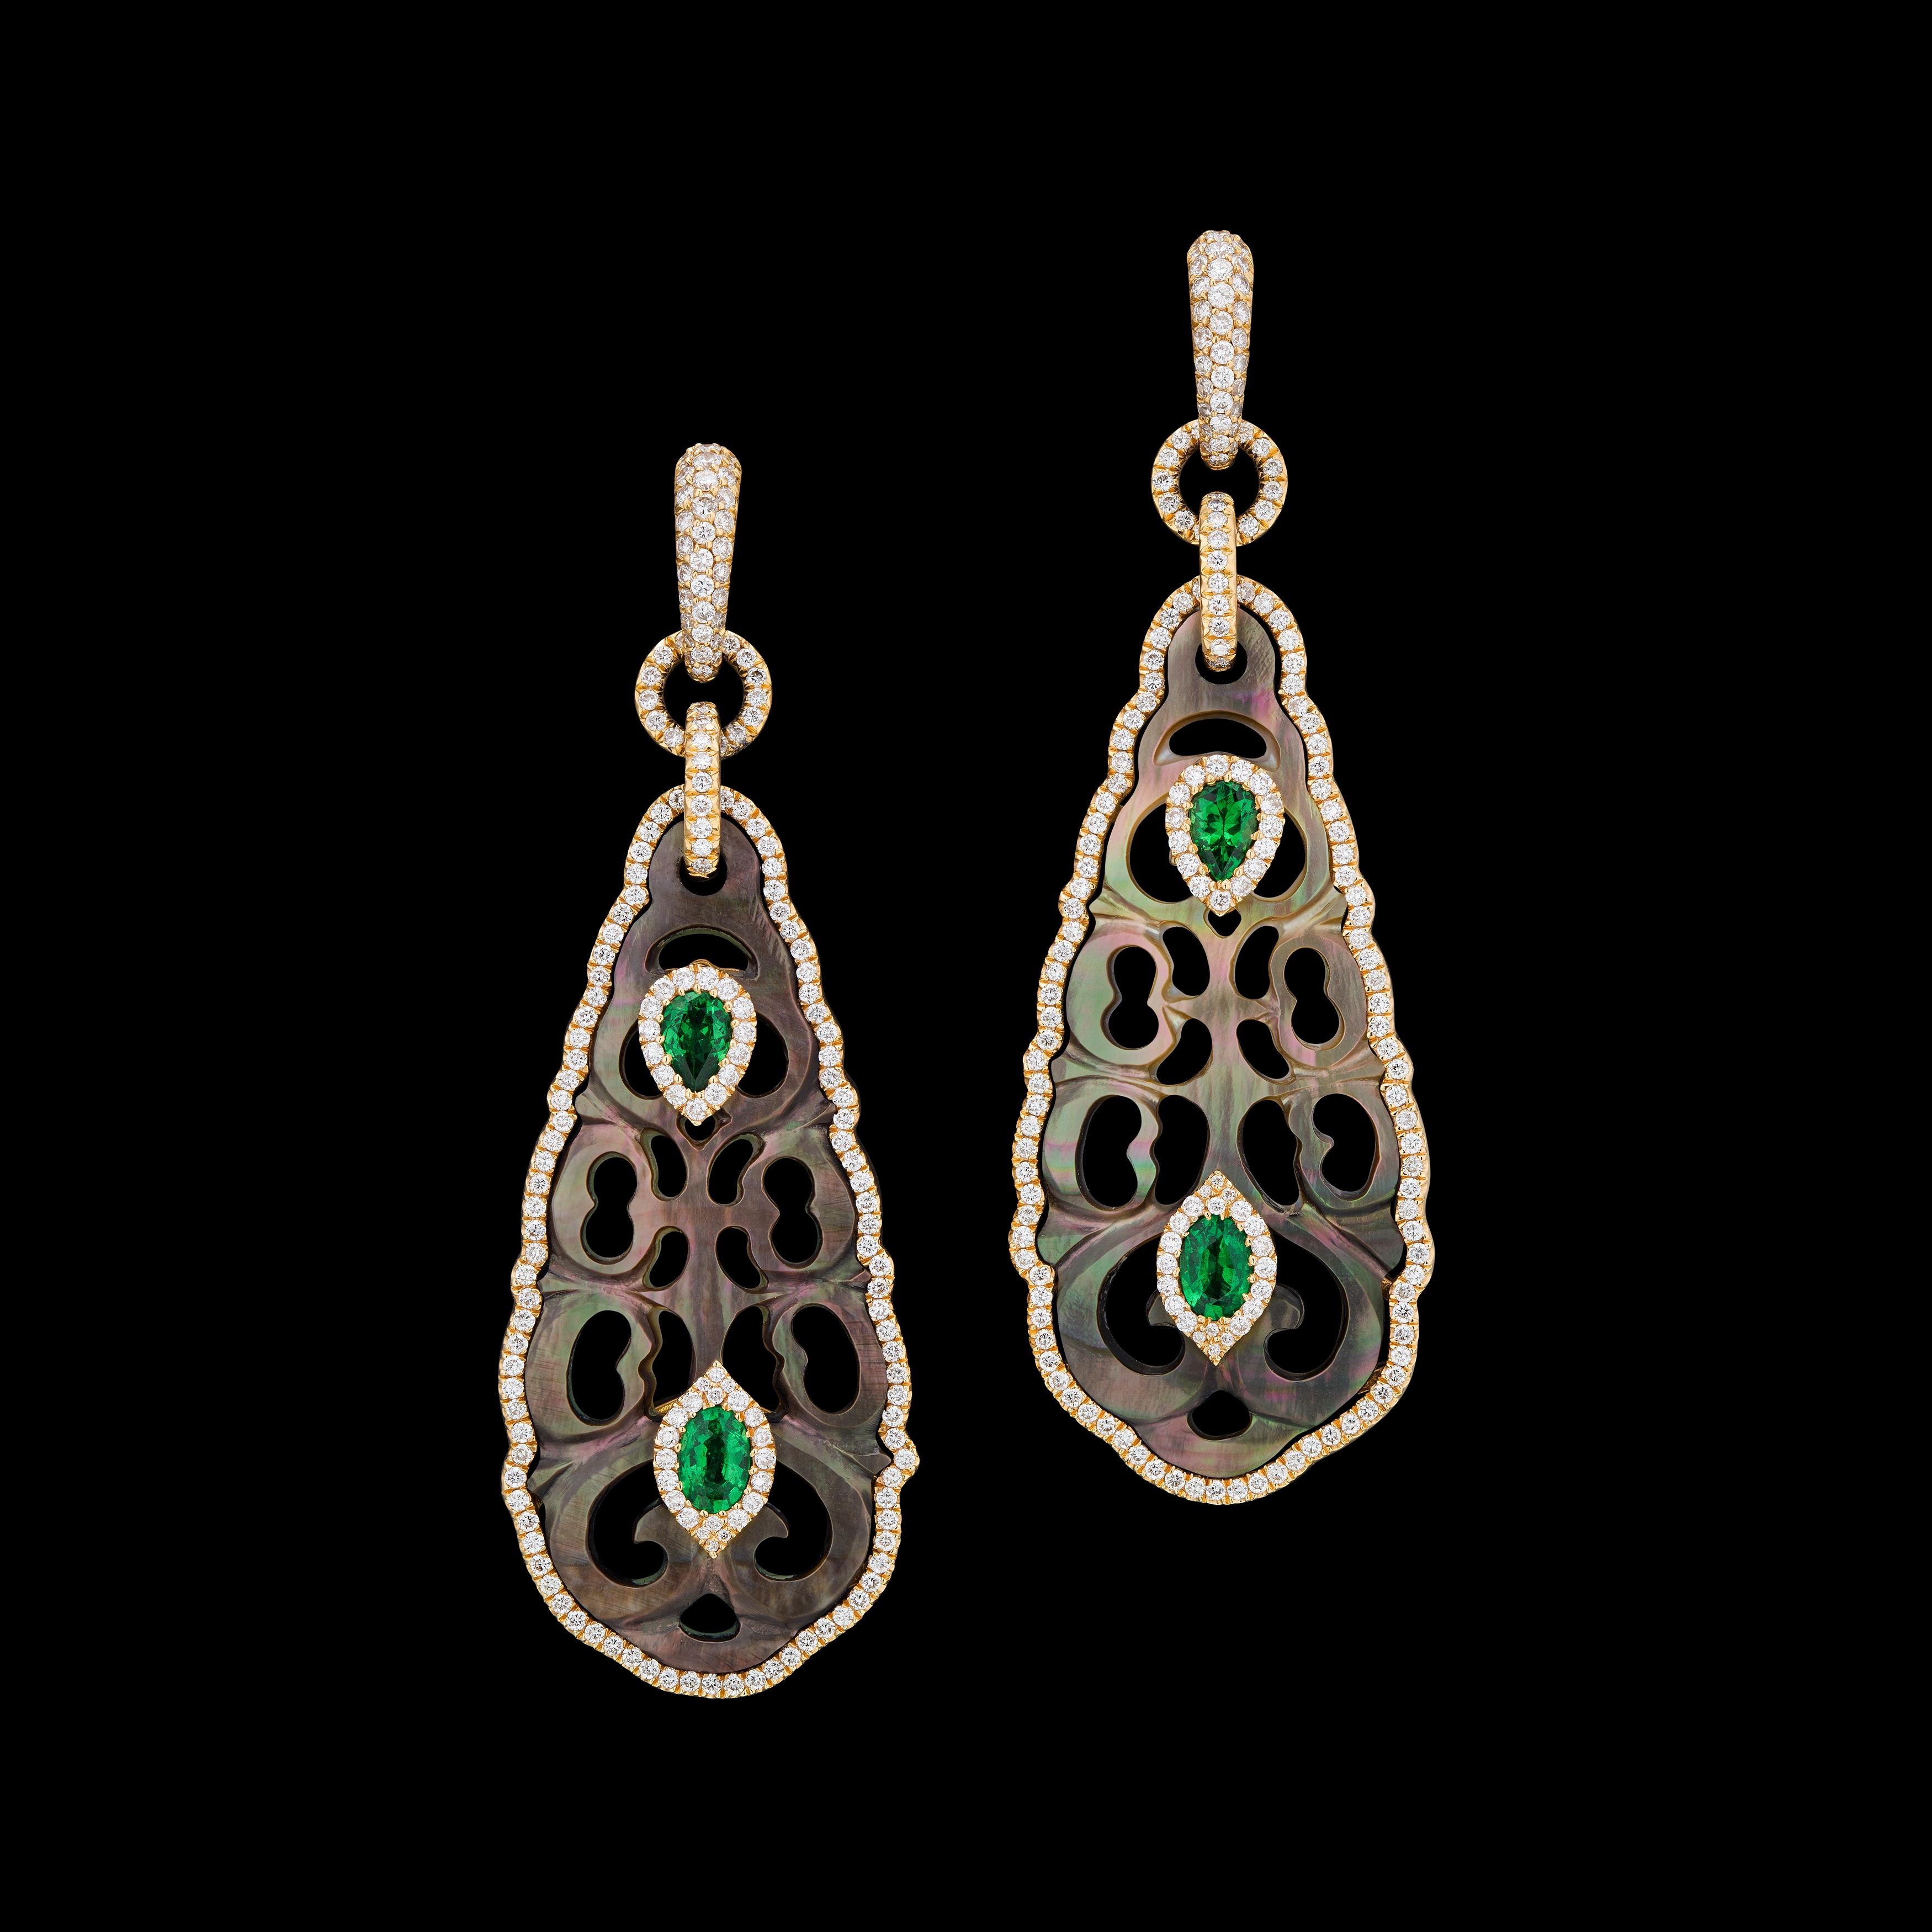 Hand carved Tahitian M.O.P with green tsavorite set in rose 18k gold with diamonds.